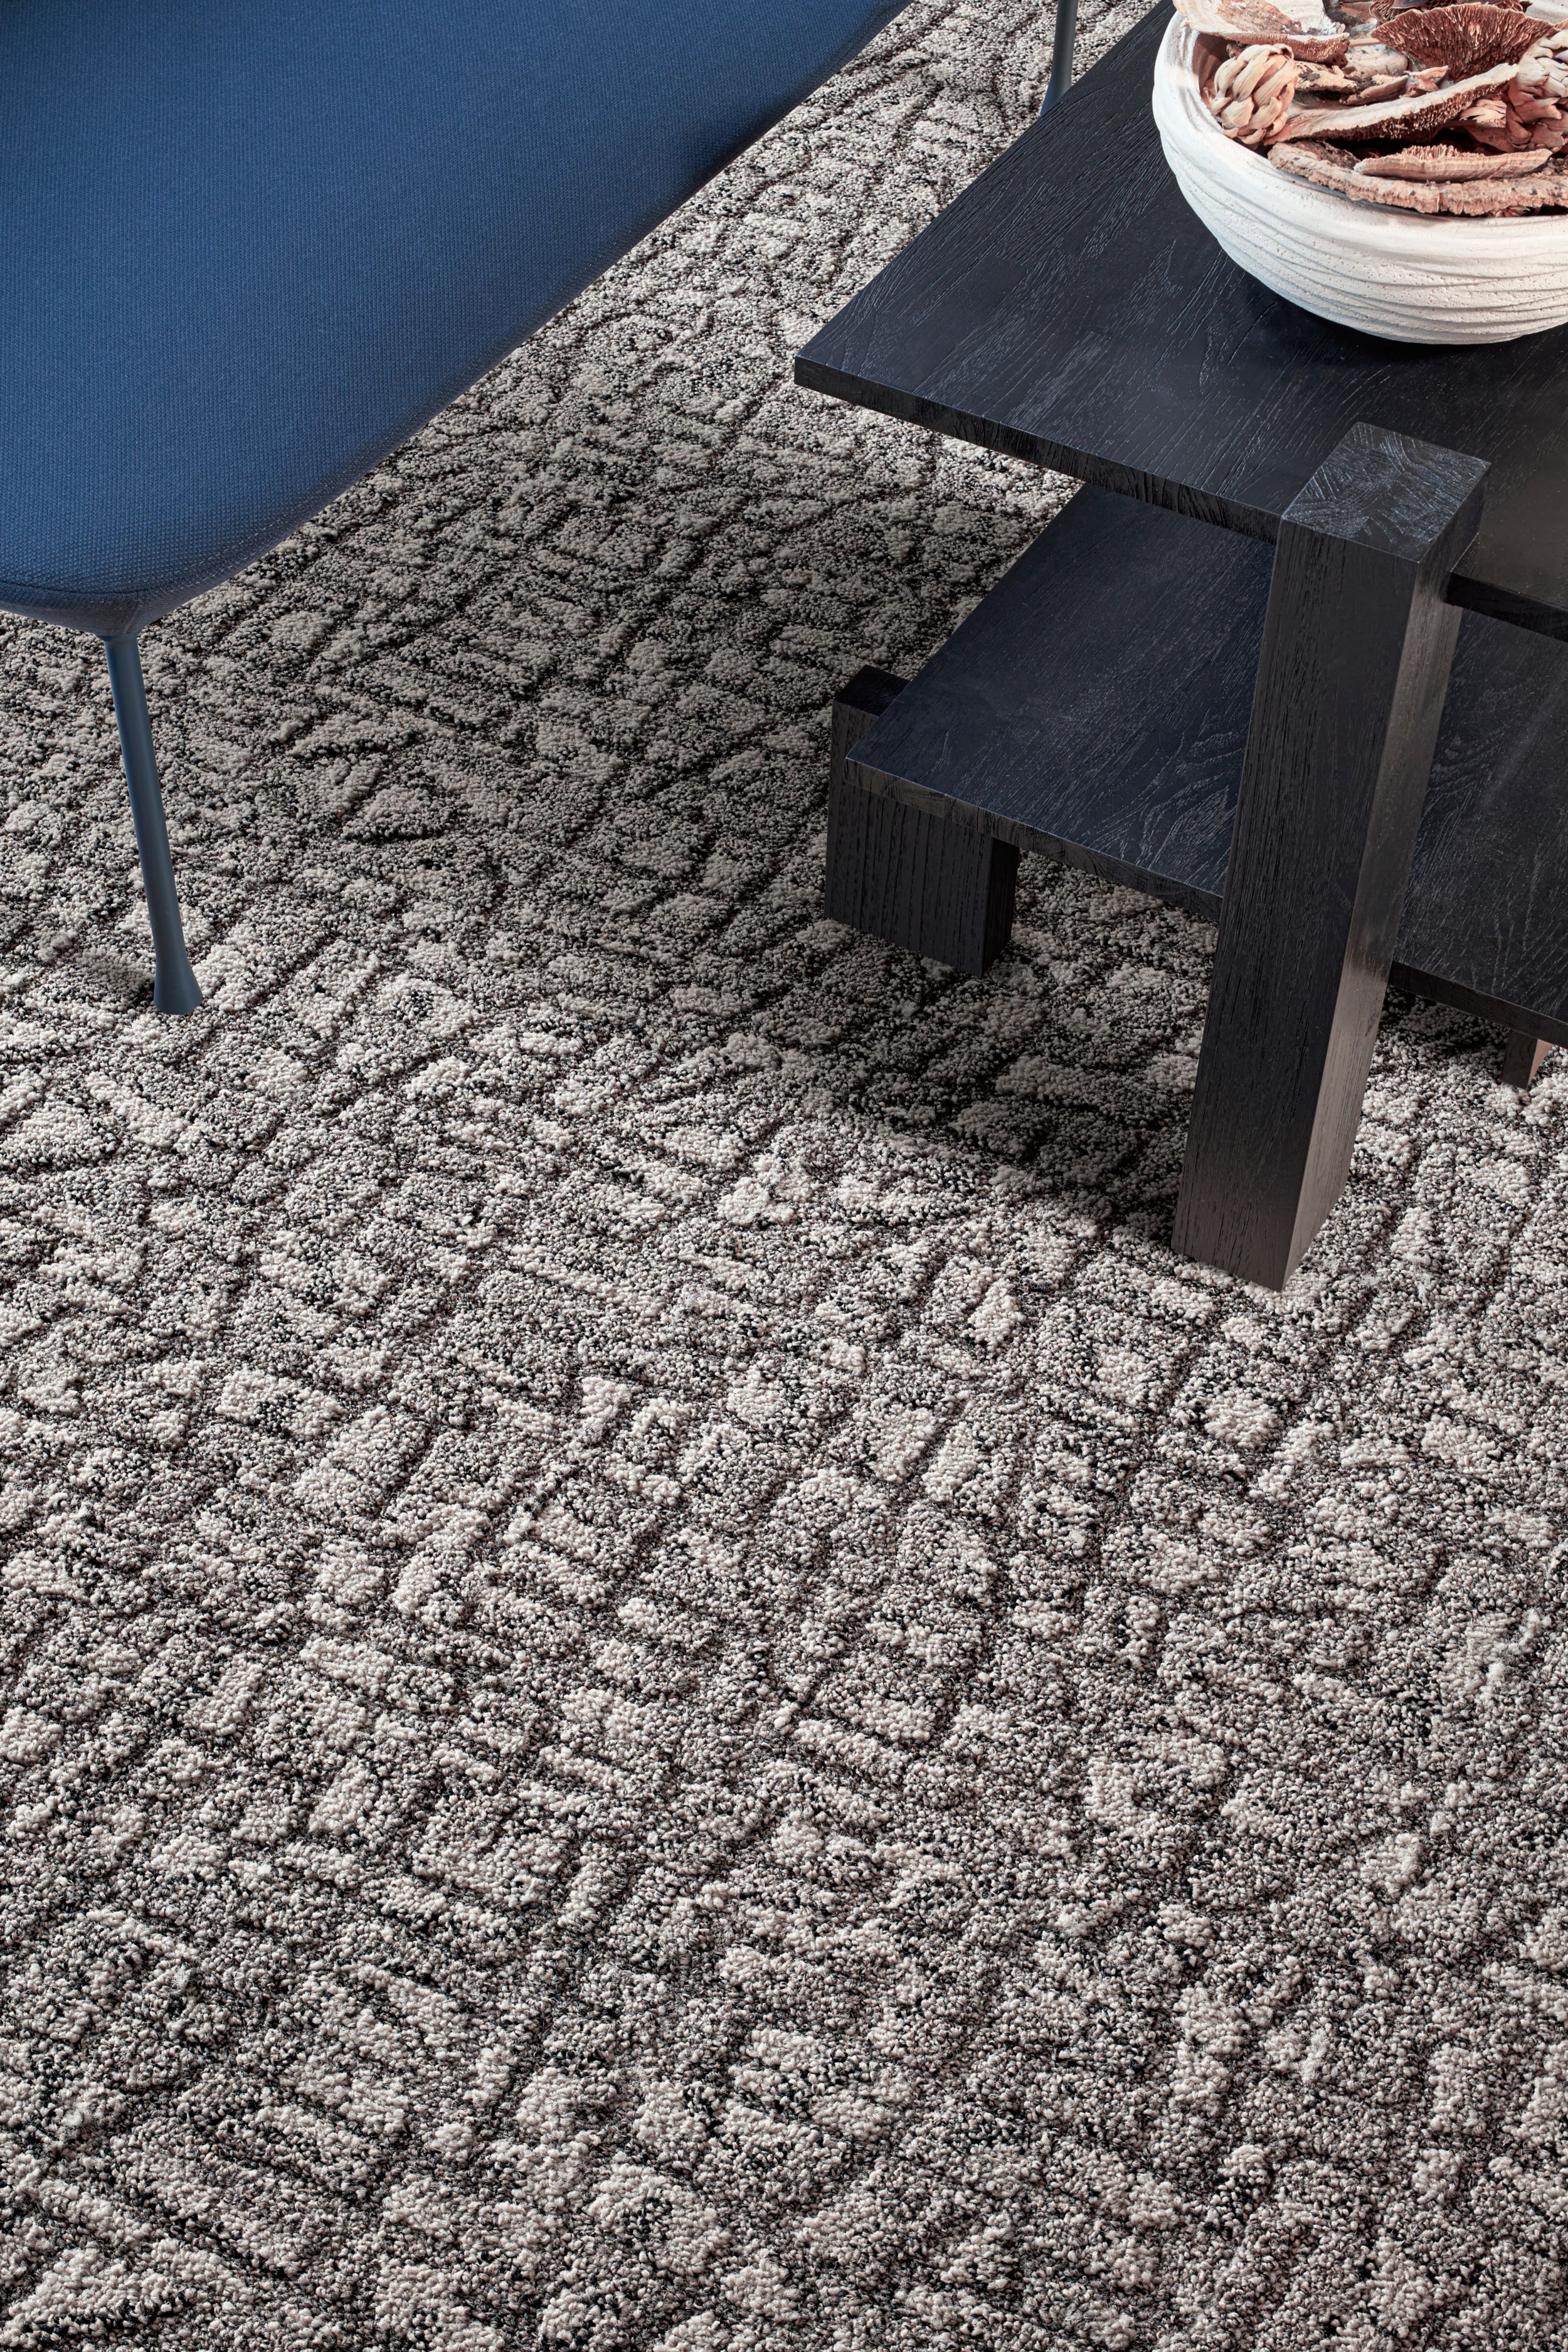 Interface E610 carpet tile in lobby with blue bench and dark wood table afbeeldingnummer 3